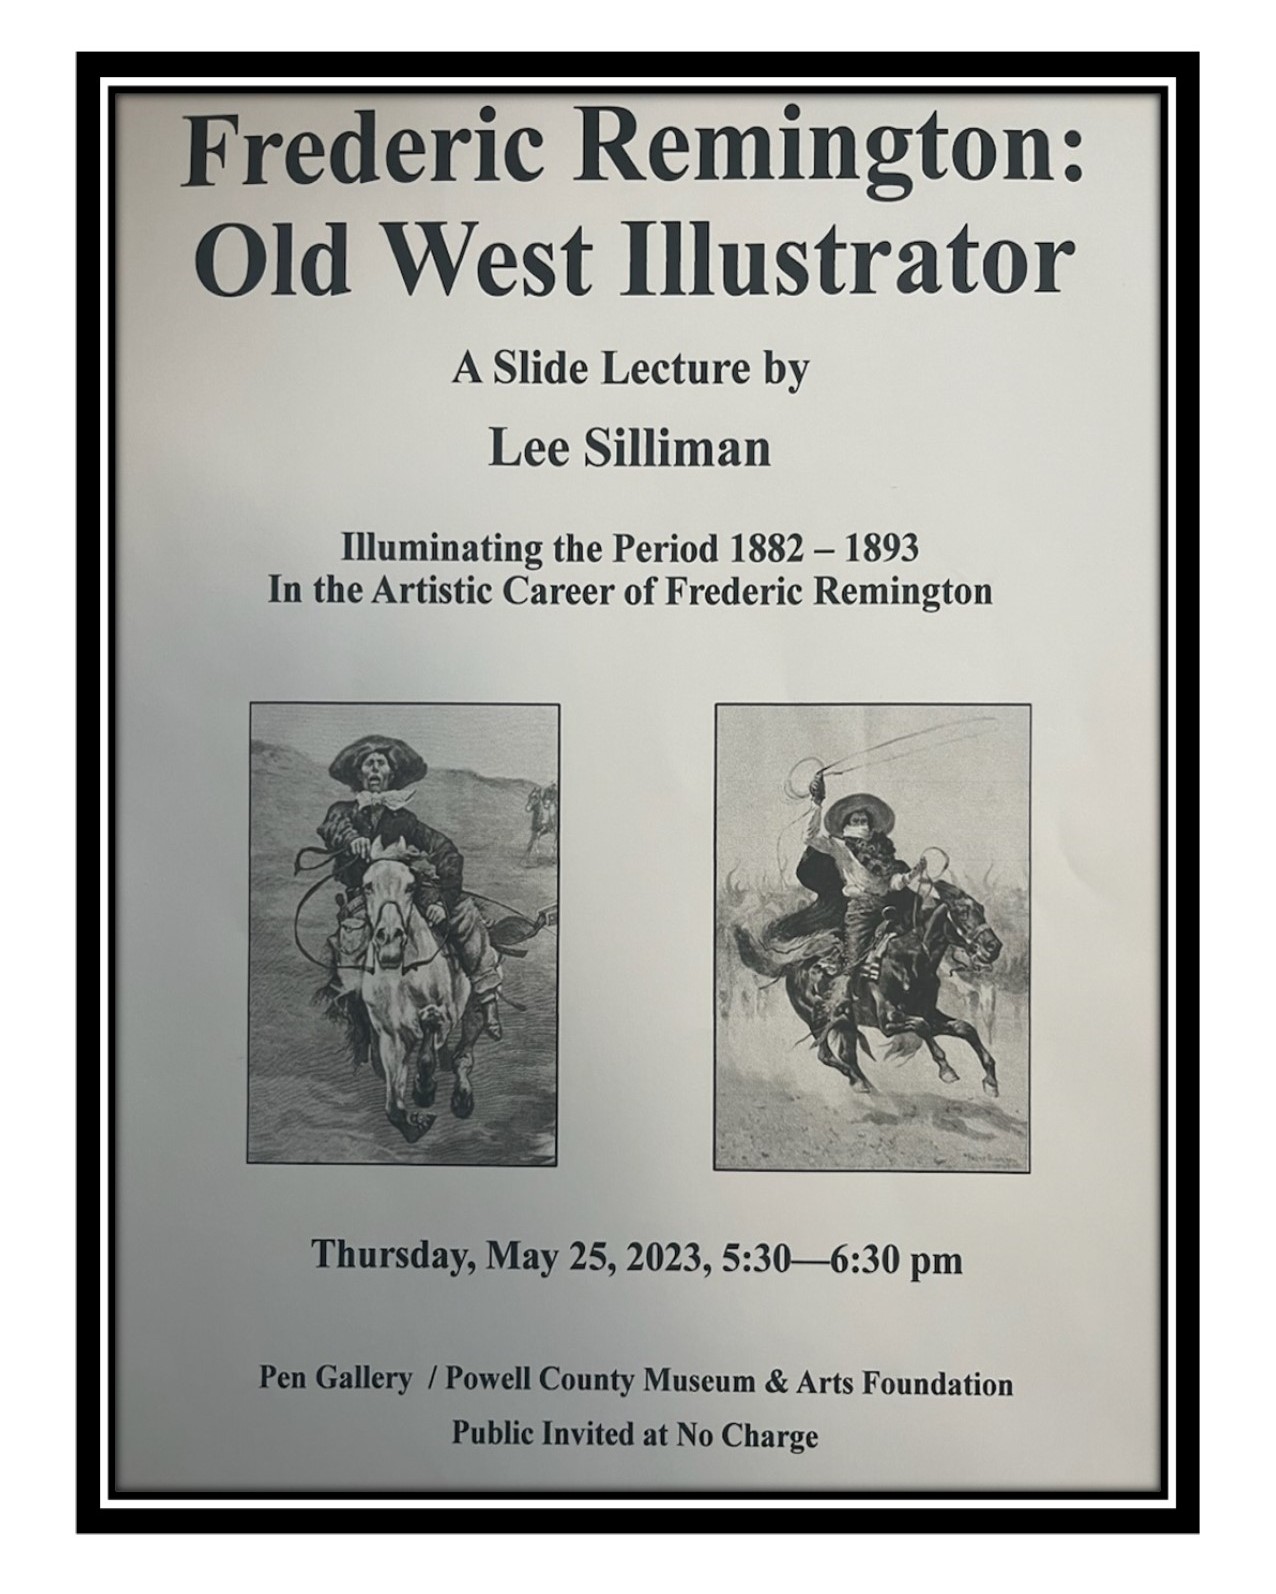 Frederic Remington: Old West Illustrator presented by Lee Silliman